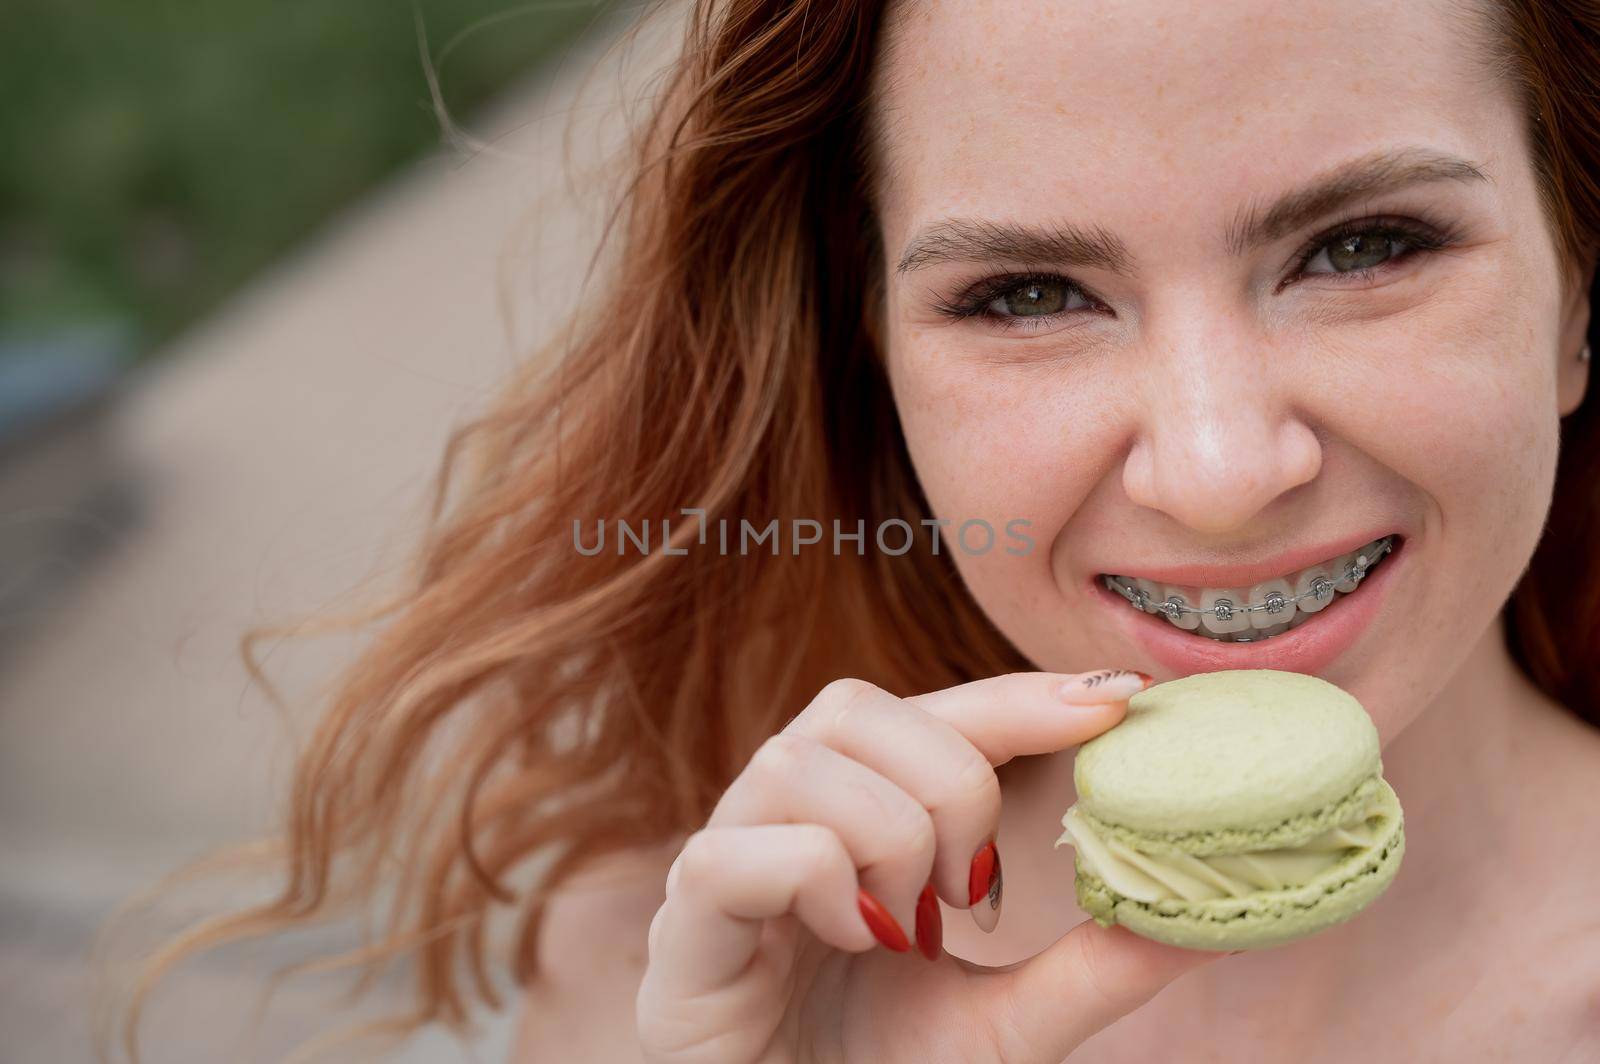 Young red-haired woman with braces eating macaron cake. by mrwed54